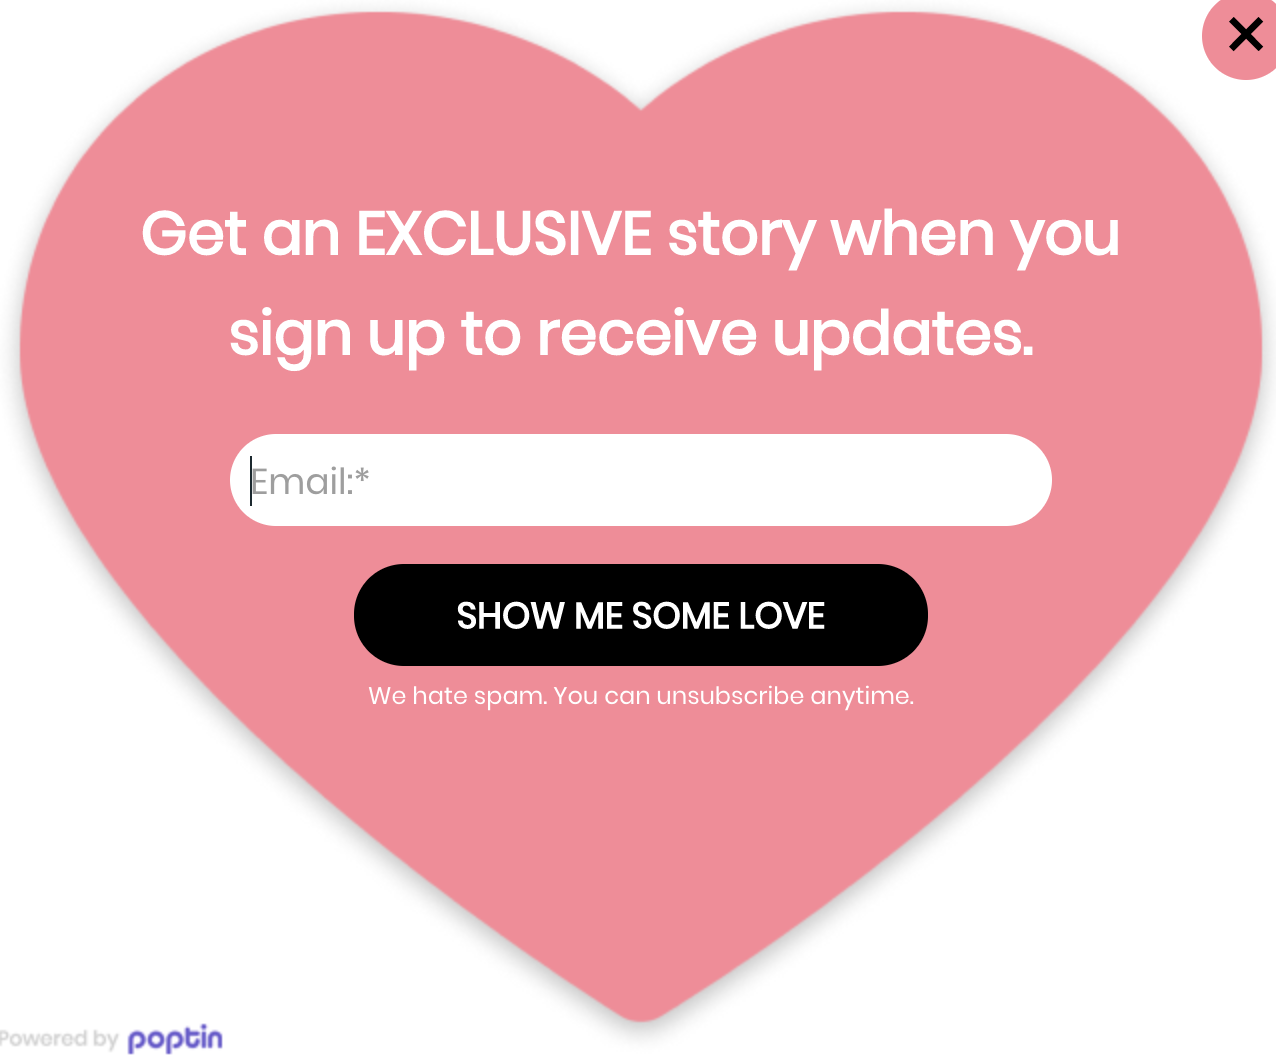 Image of Liz Gavin's ad for an exclusive story when you sign up.